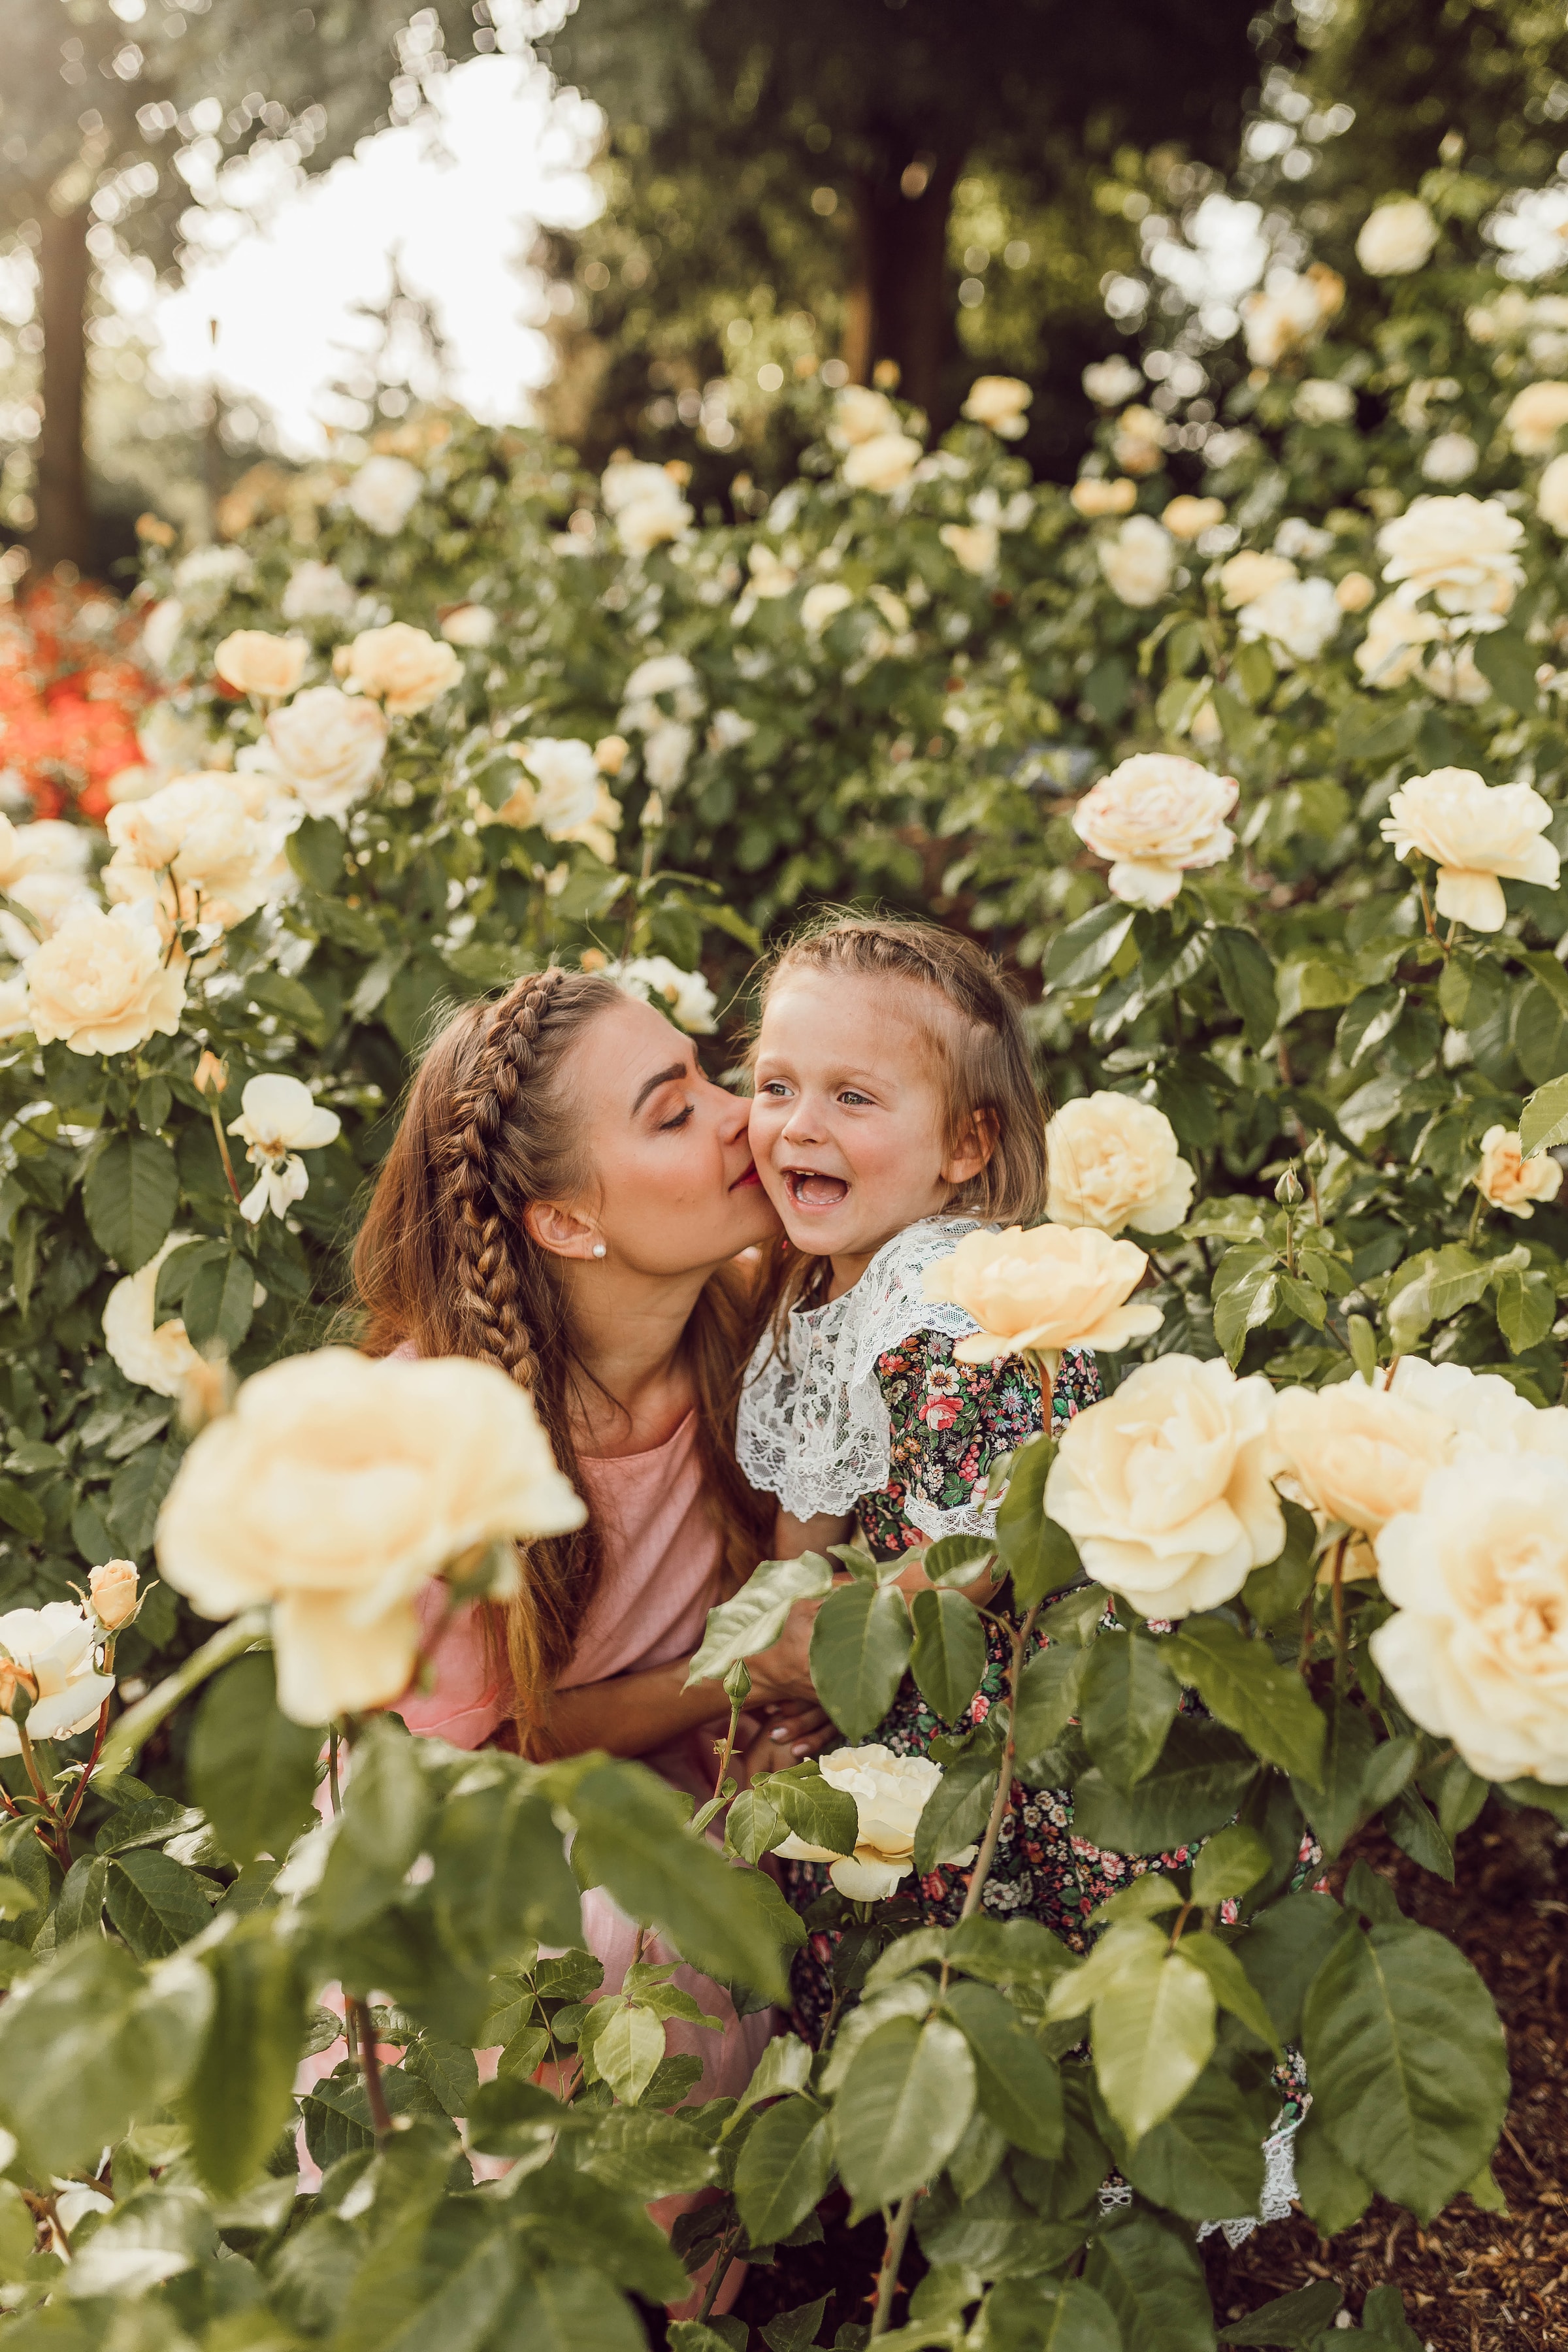 A mother kissing her daughter in a garden | Source: Unsplash